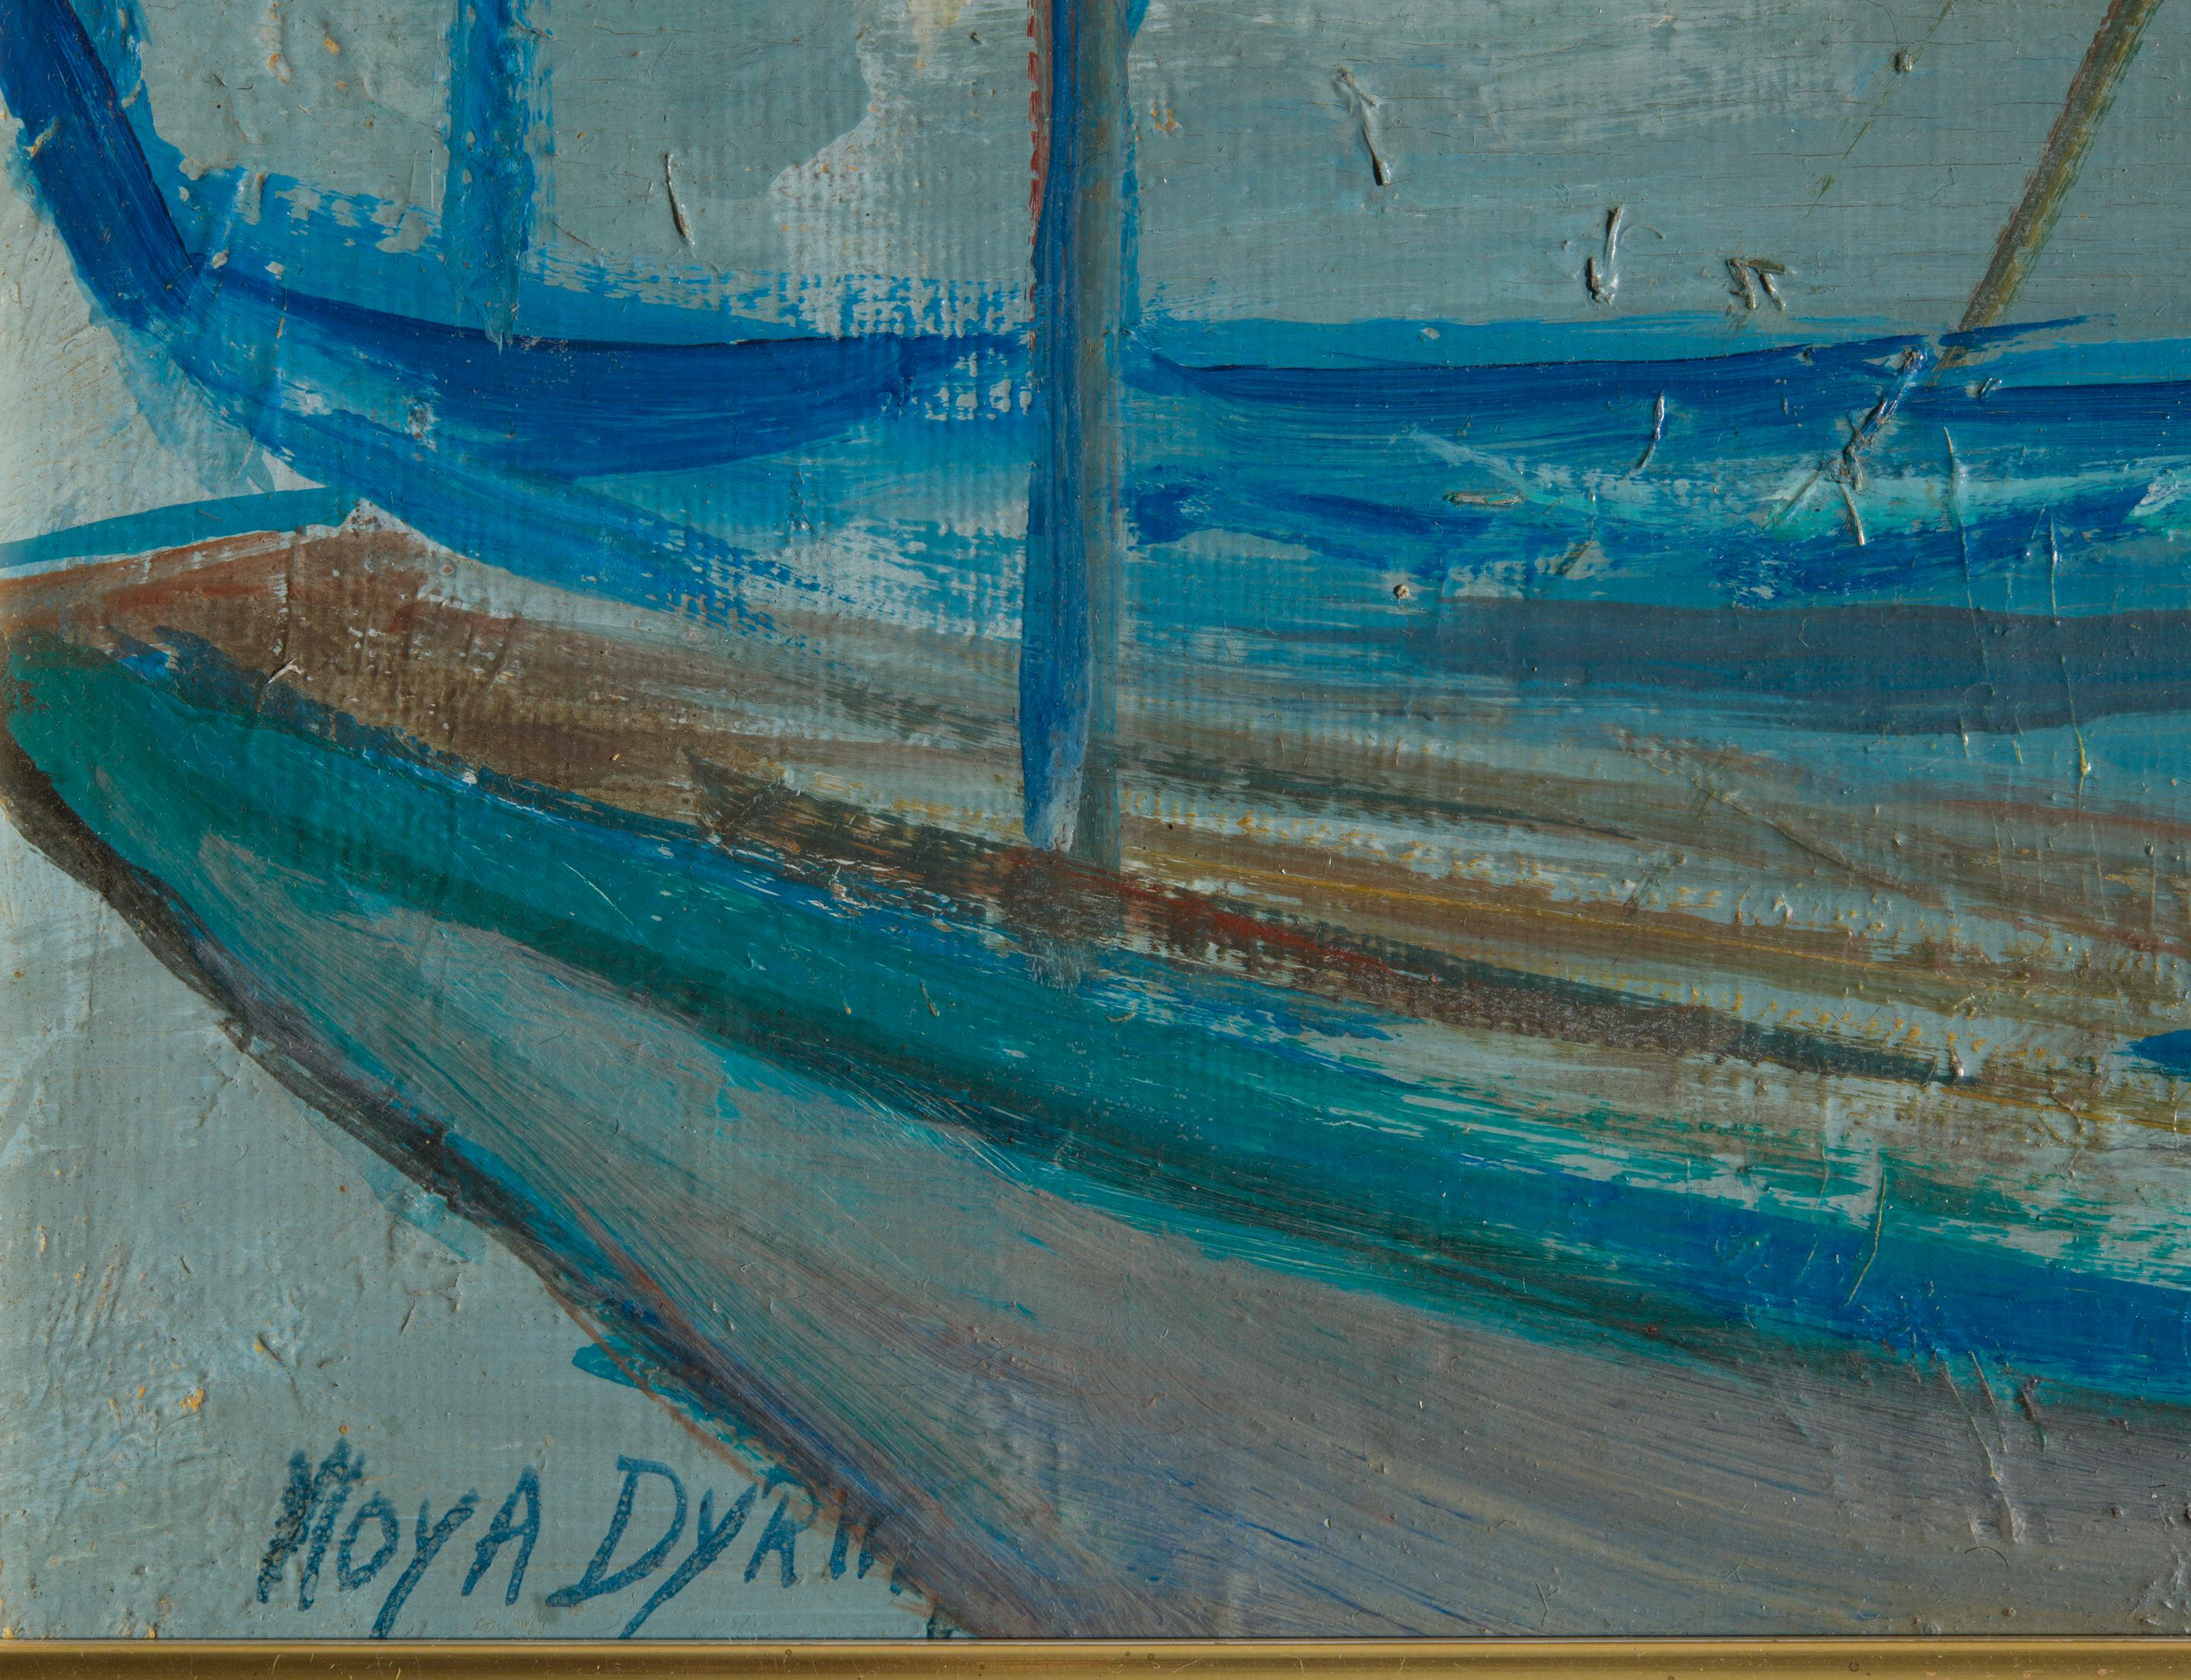 Beautiful and evocative oil painting by the great French school modern artist Moya Dyring specializing in marinas.
It depicts a harbor with boats probably from the French Riviera painted with great intensity but giving, at the same time, a sweet